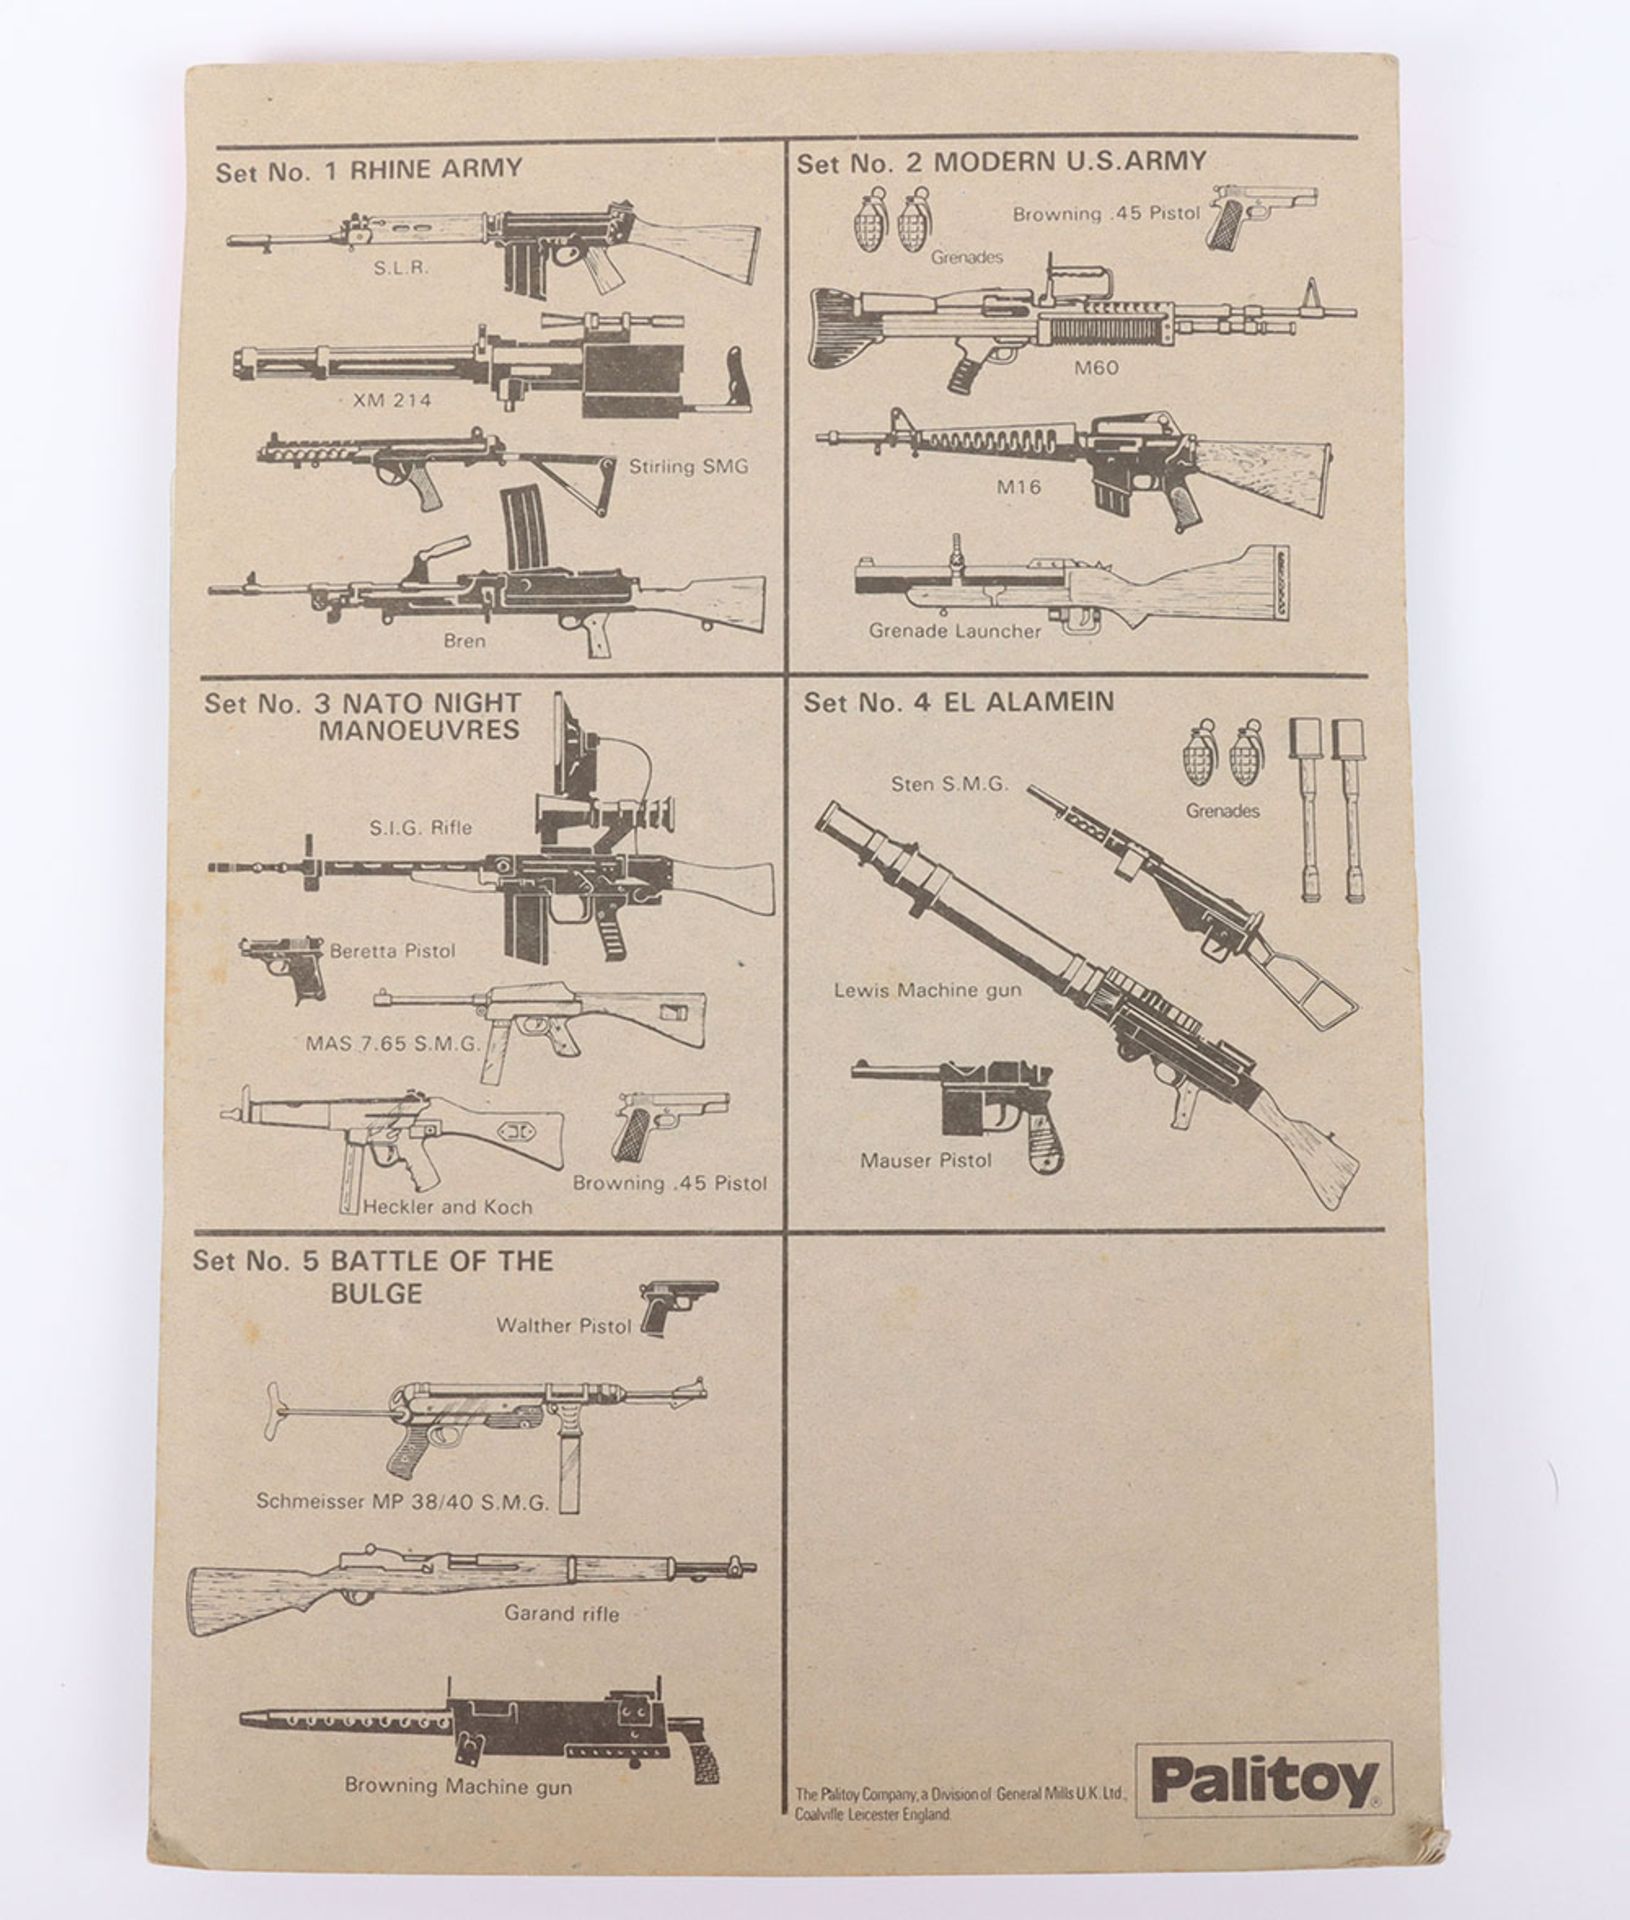 Palitoy Action Man Weapons Arsenal Card Nato Night Manoeuvres - Image 2 of 4